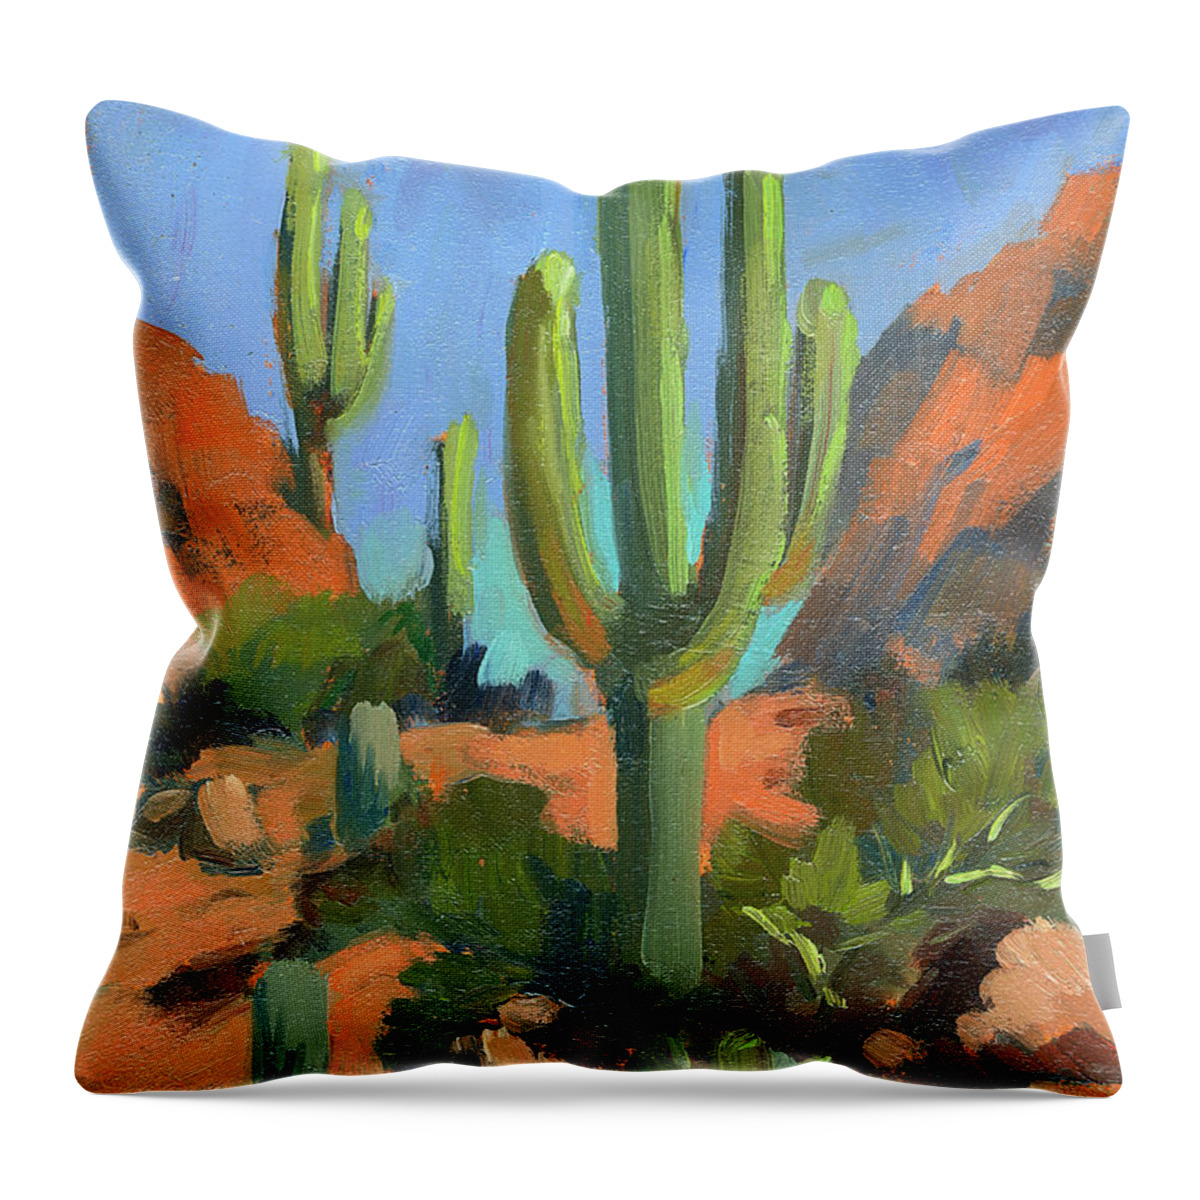 Desert Morning Throw Pillow featuring the painting Desert Morning Saguaro by Diane McClary